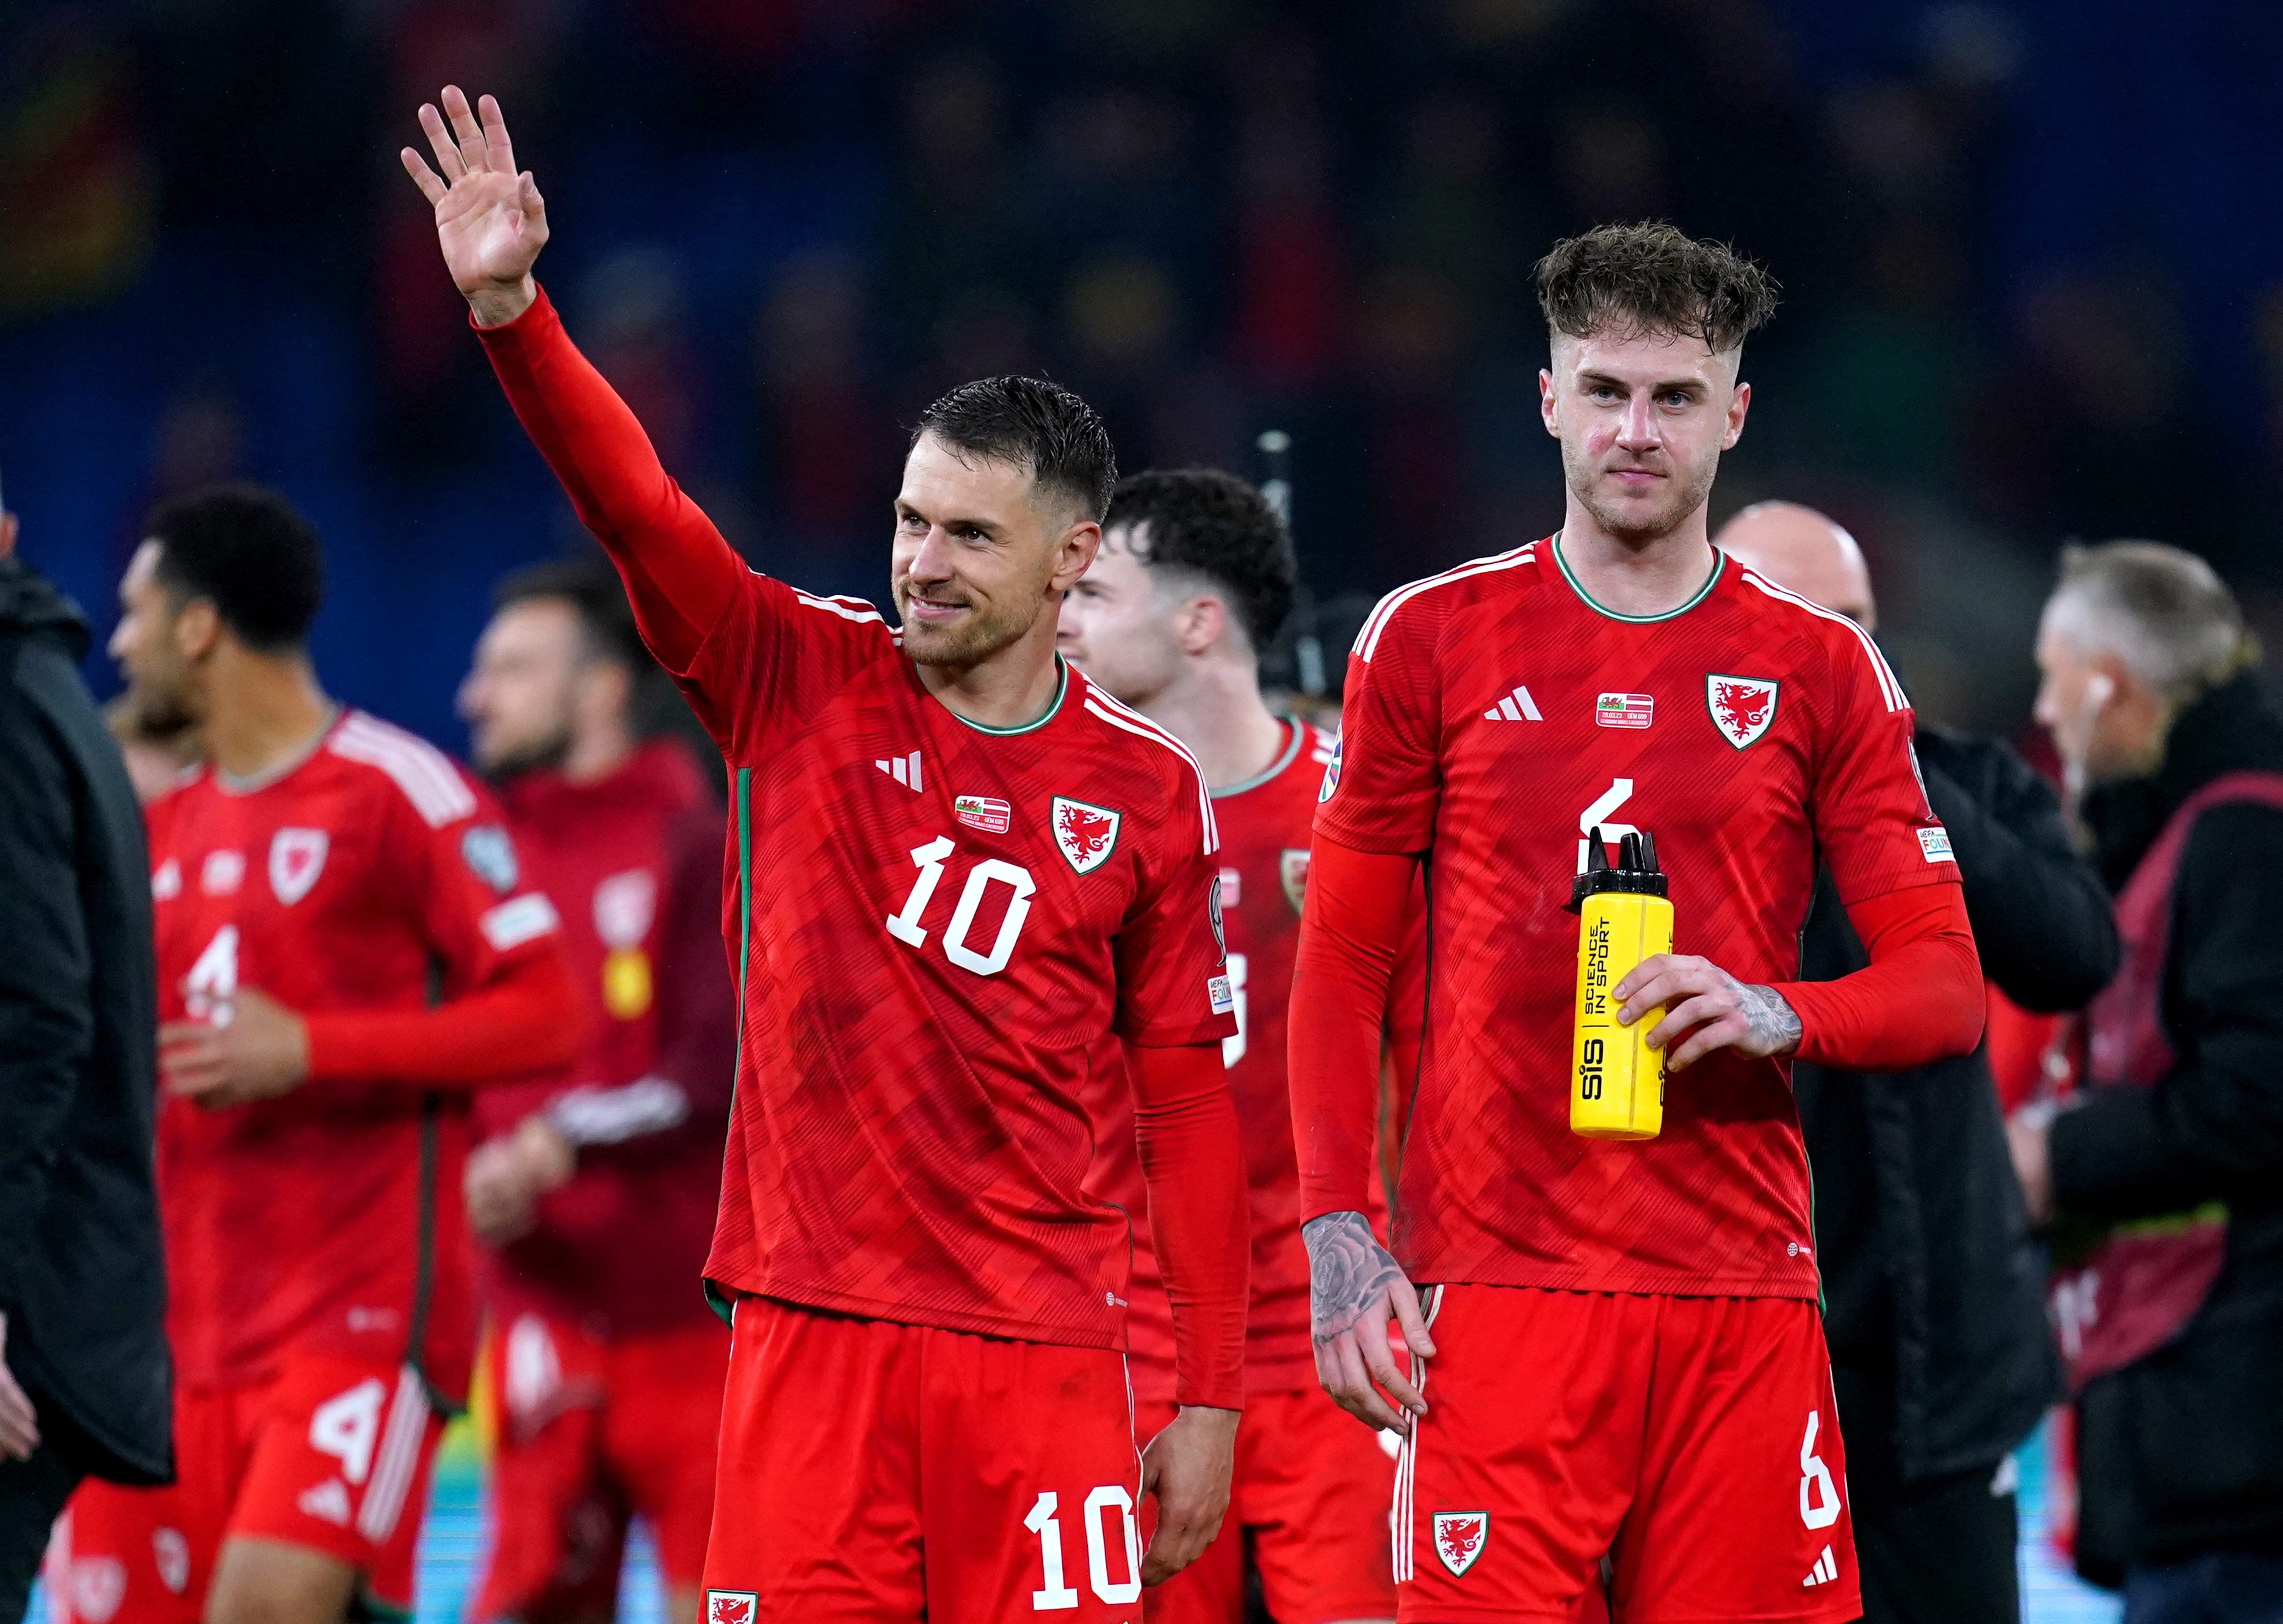 Cardiff City: Big Aaron Ramsey news may benefit one particular